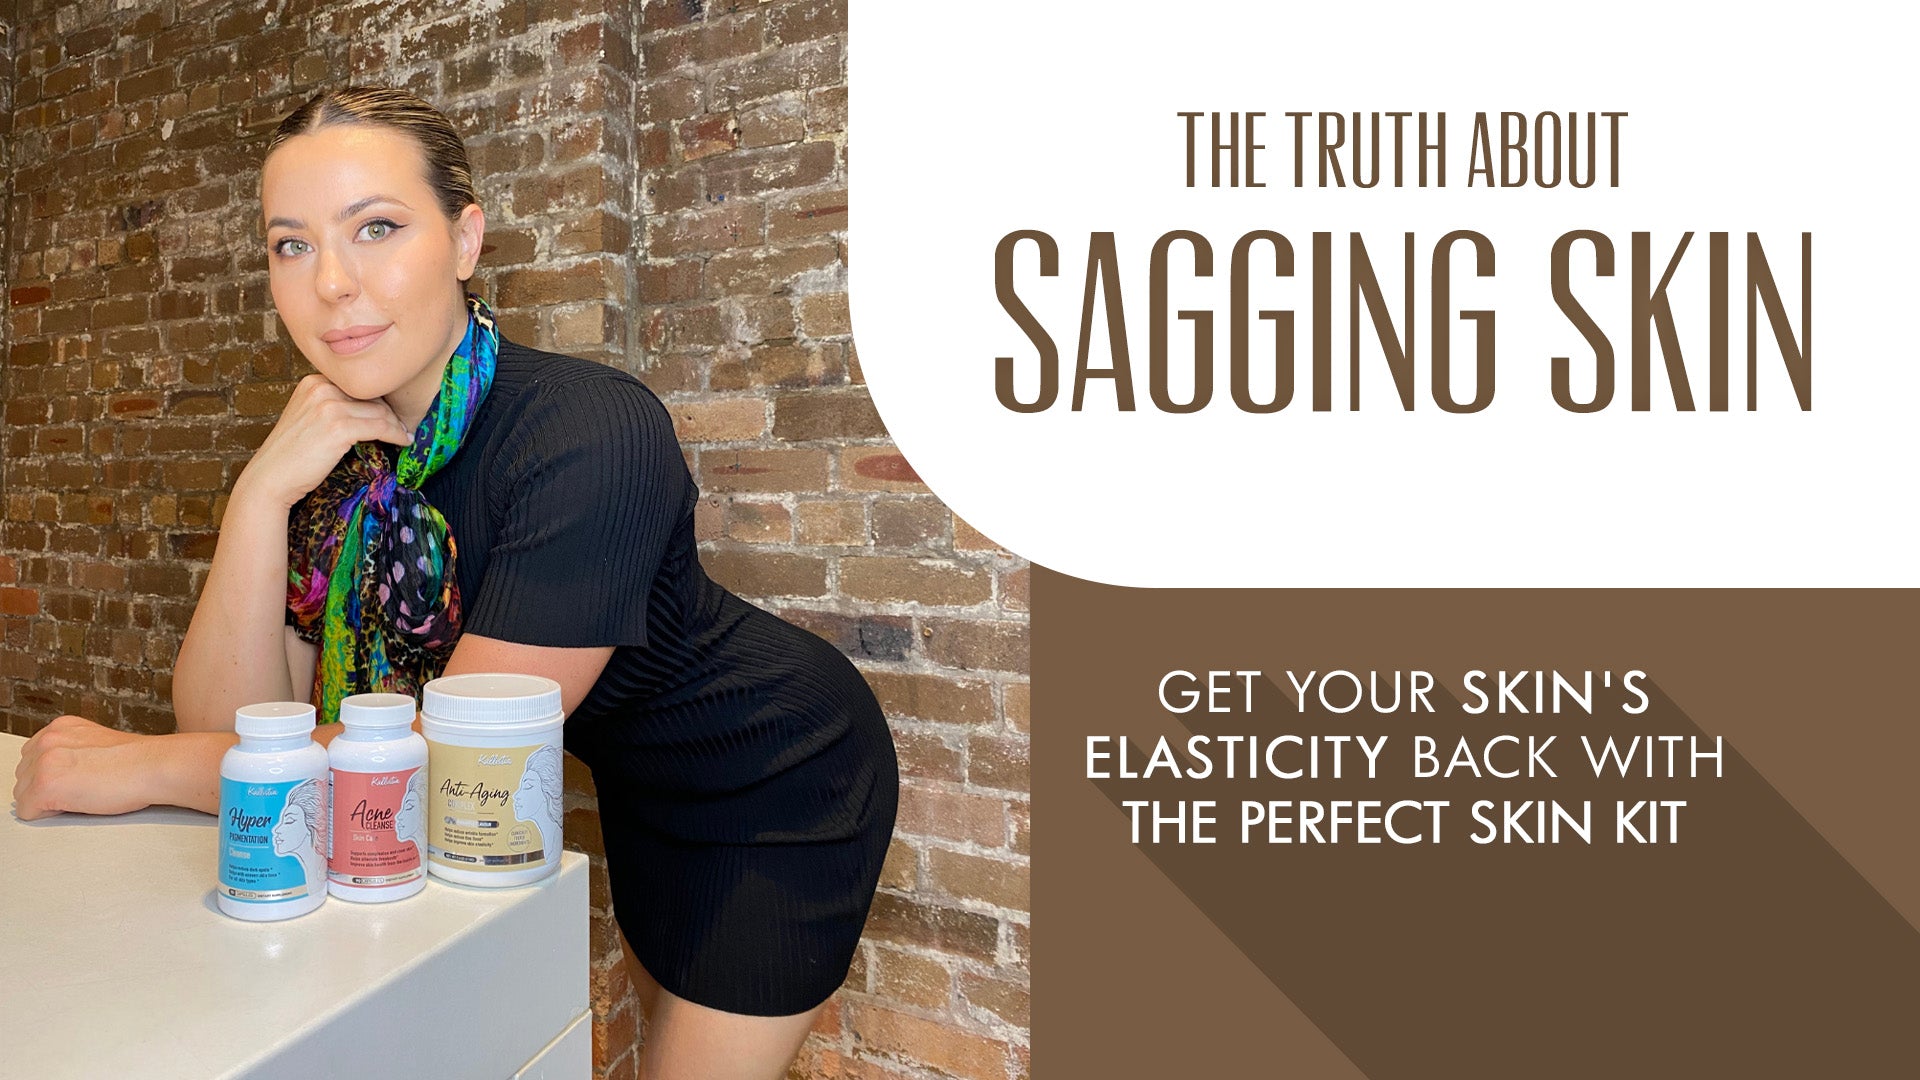 The truth about sagging skin